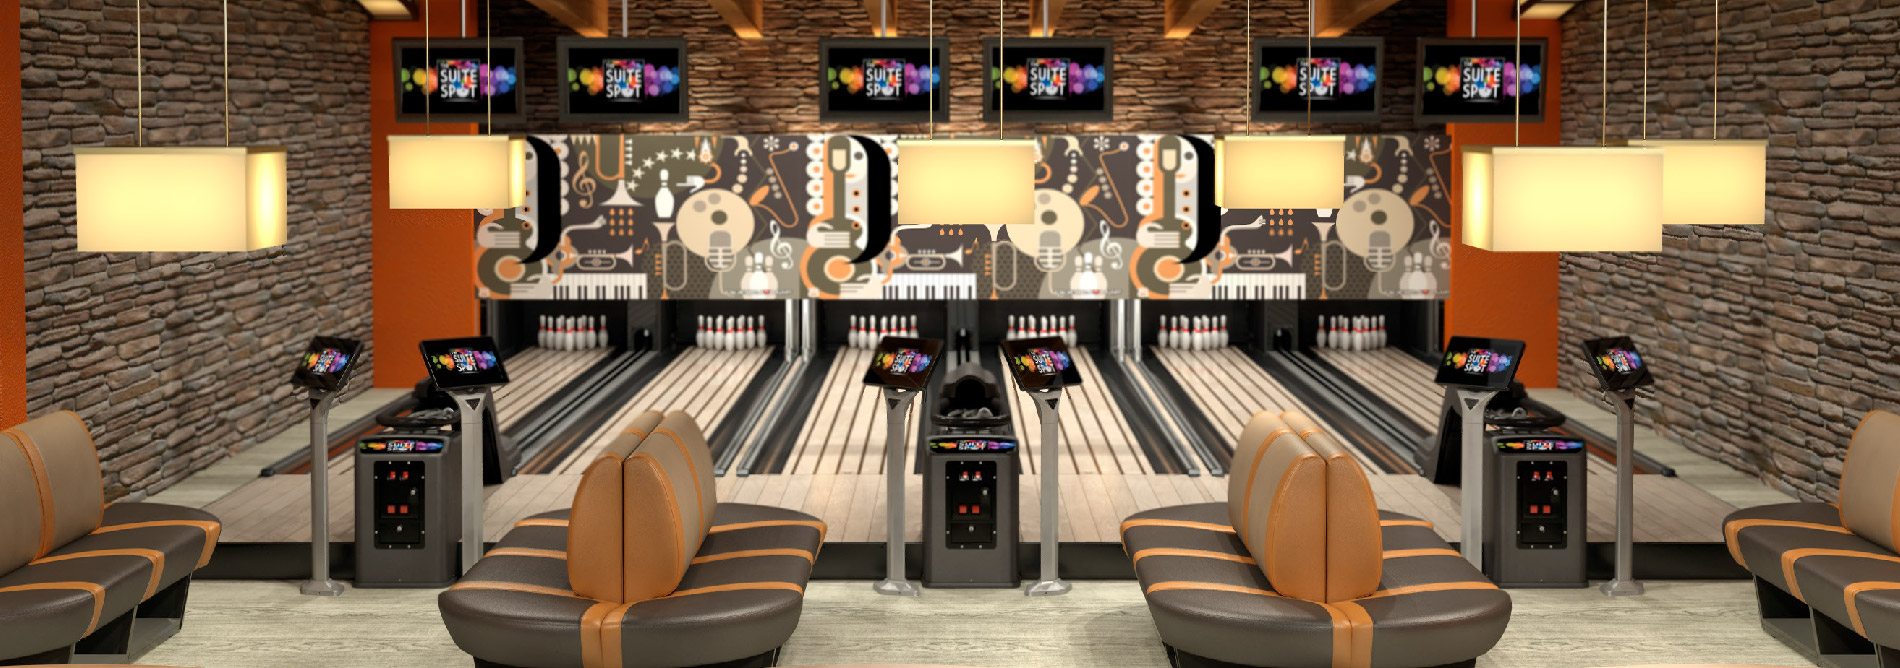 Bowling-QubicaAMF-mini-bowling-the-suite-spot-banner.jpg